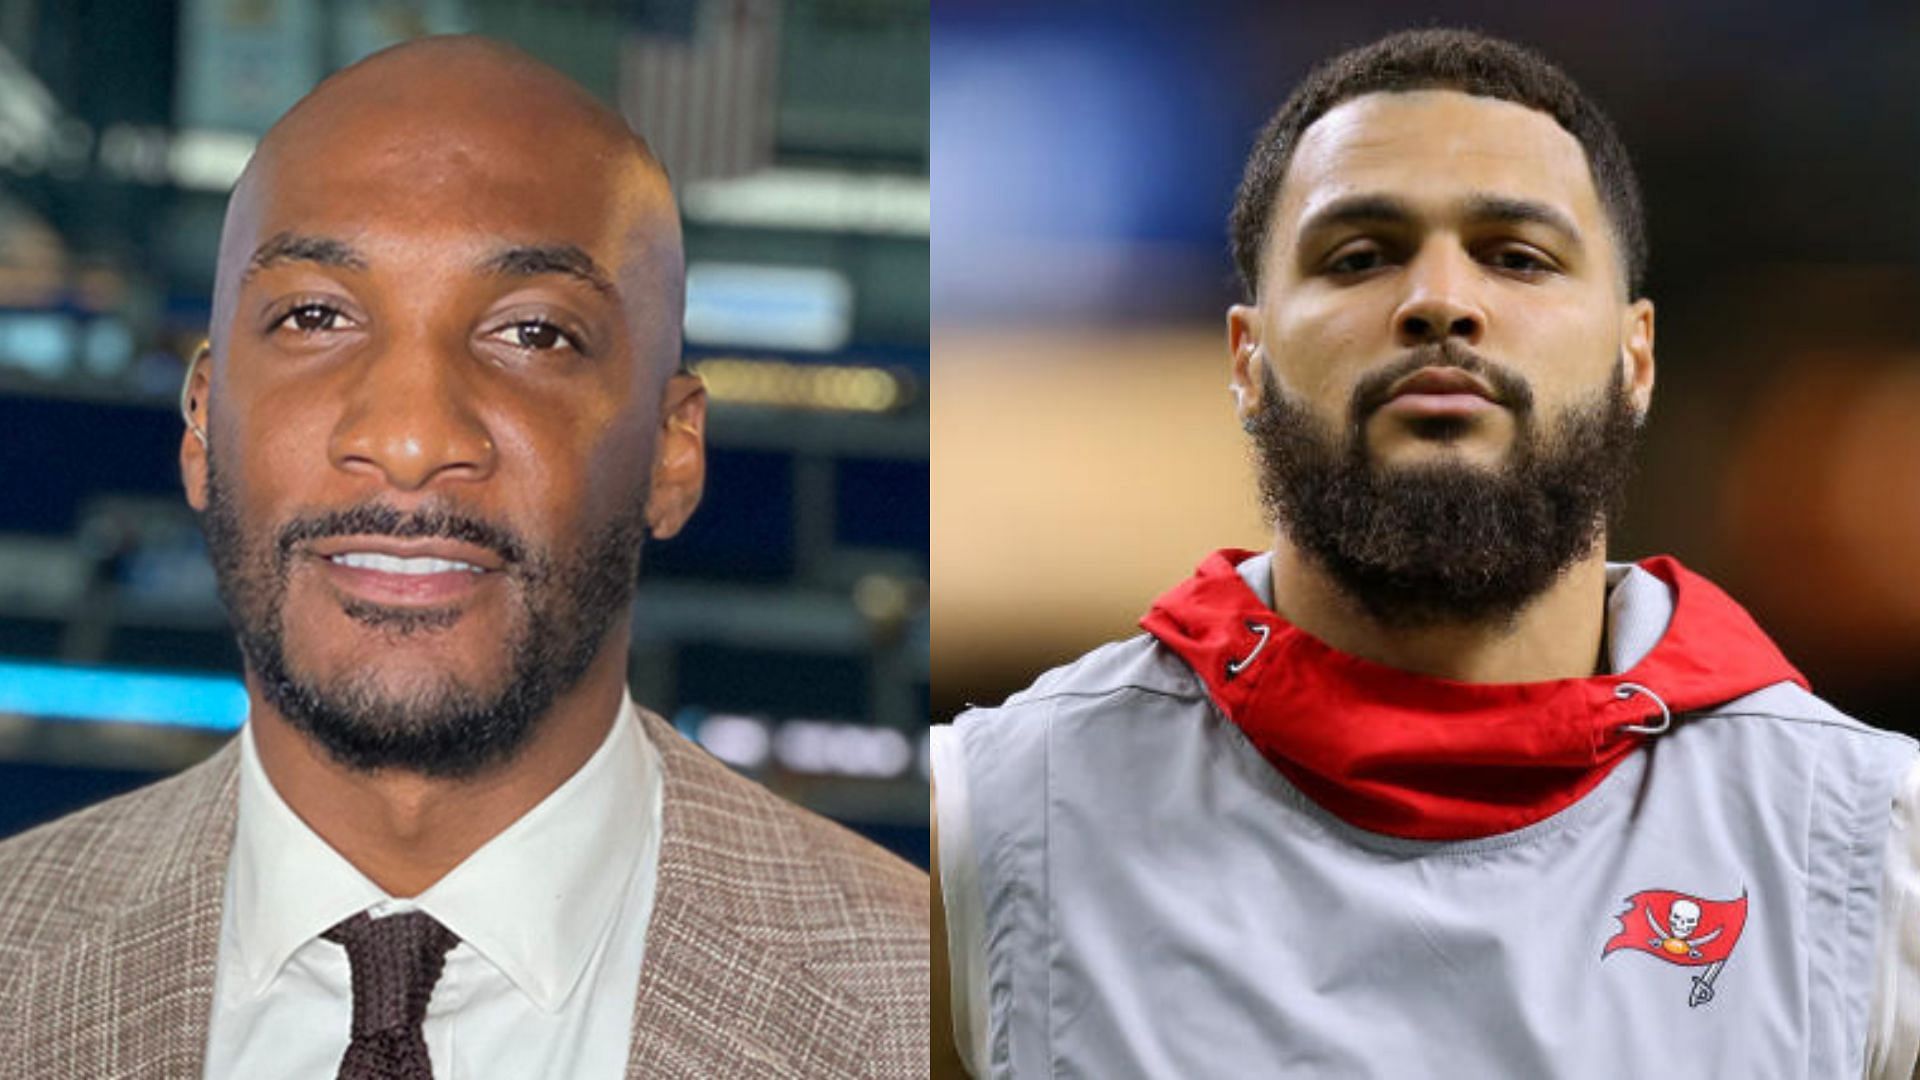 Aqib Talib (L) on WR Mike Evans (R) playing with another QB amid Bucs contract dispute